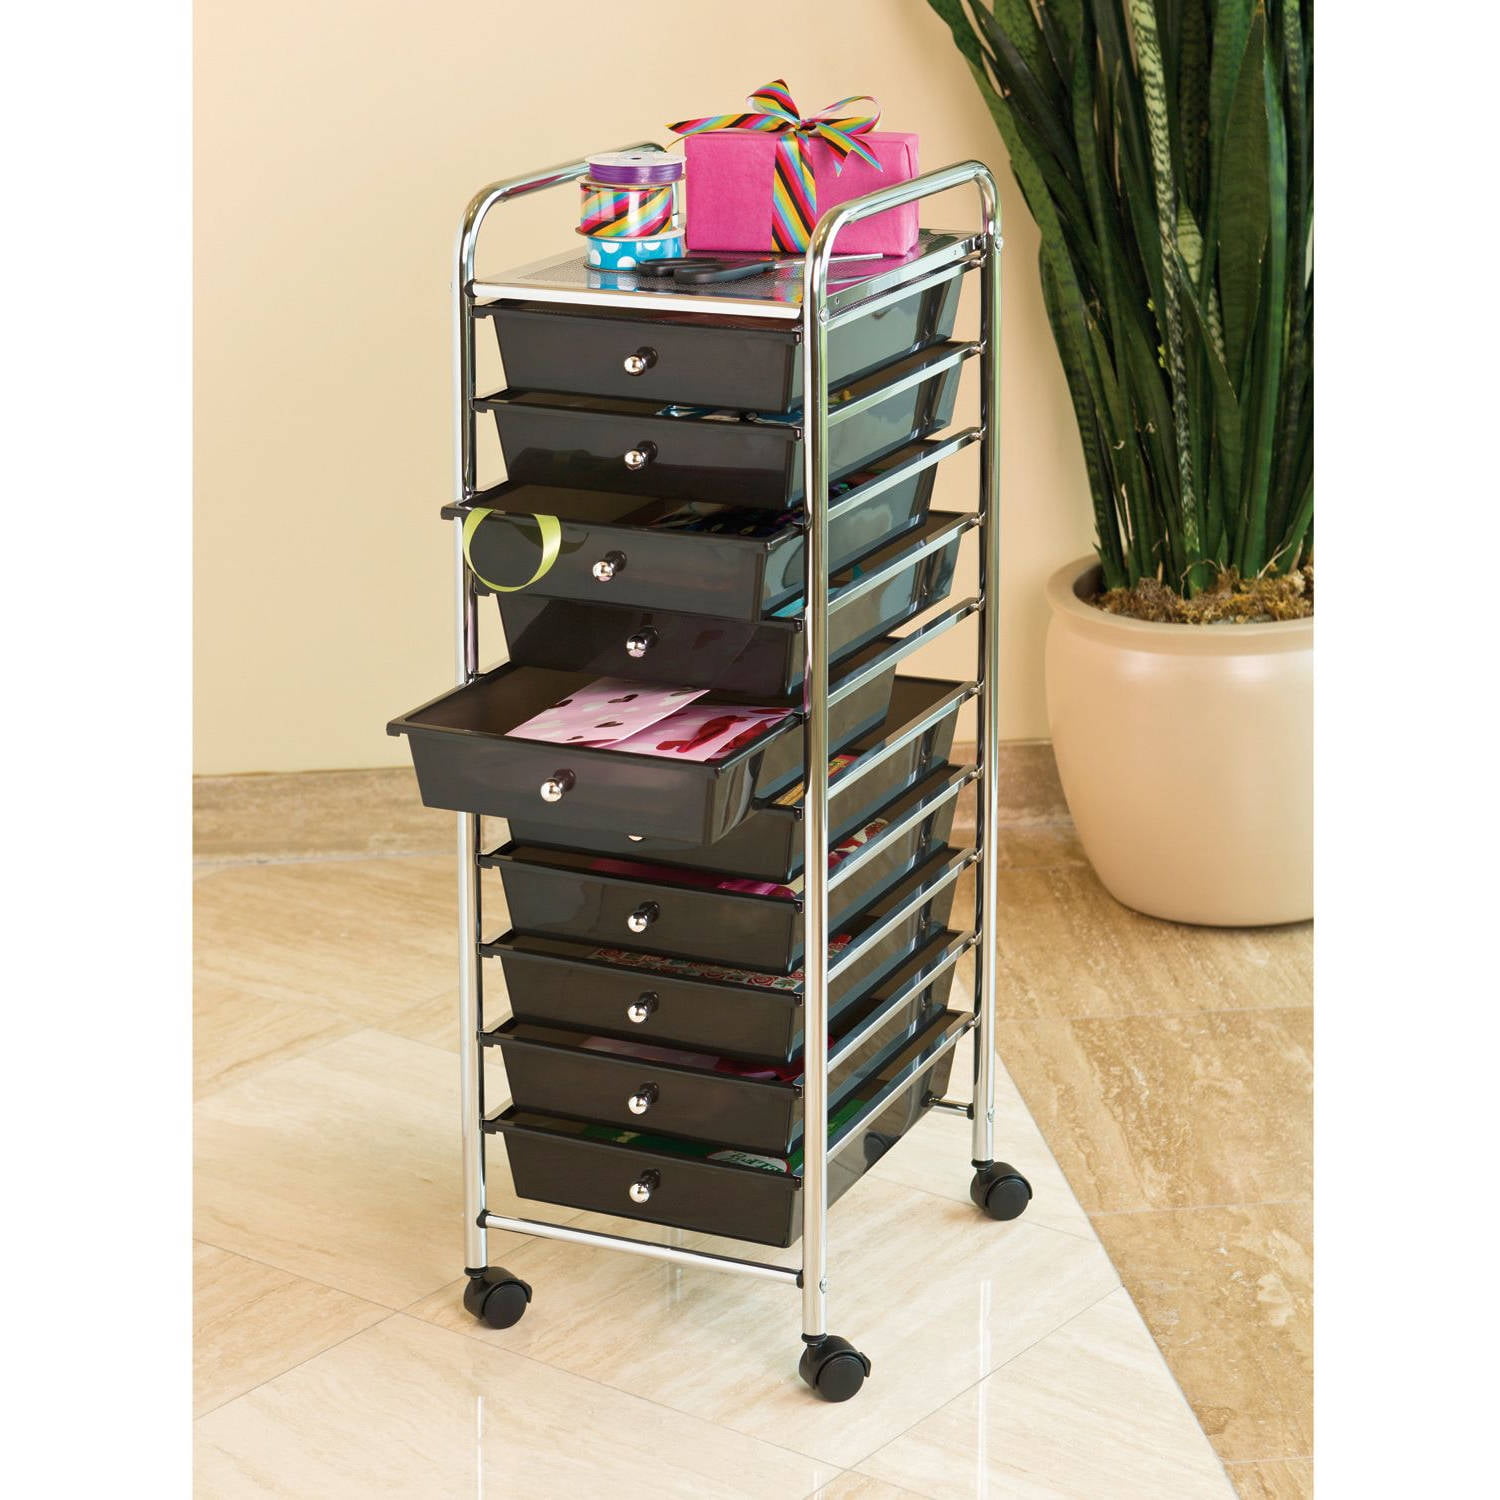 Seville Classics 15-Drawer Organizer Cart in Pearlescent Multi-Color WEB908  - The Home Depot